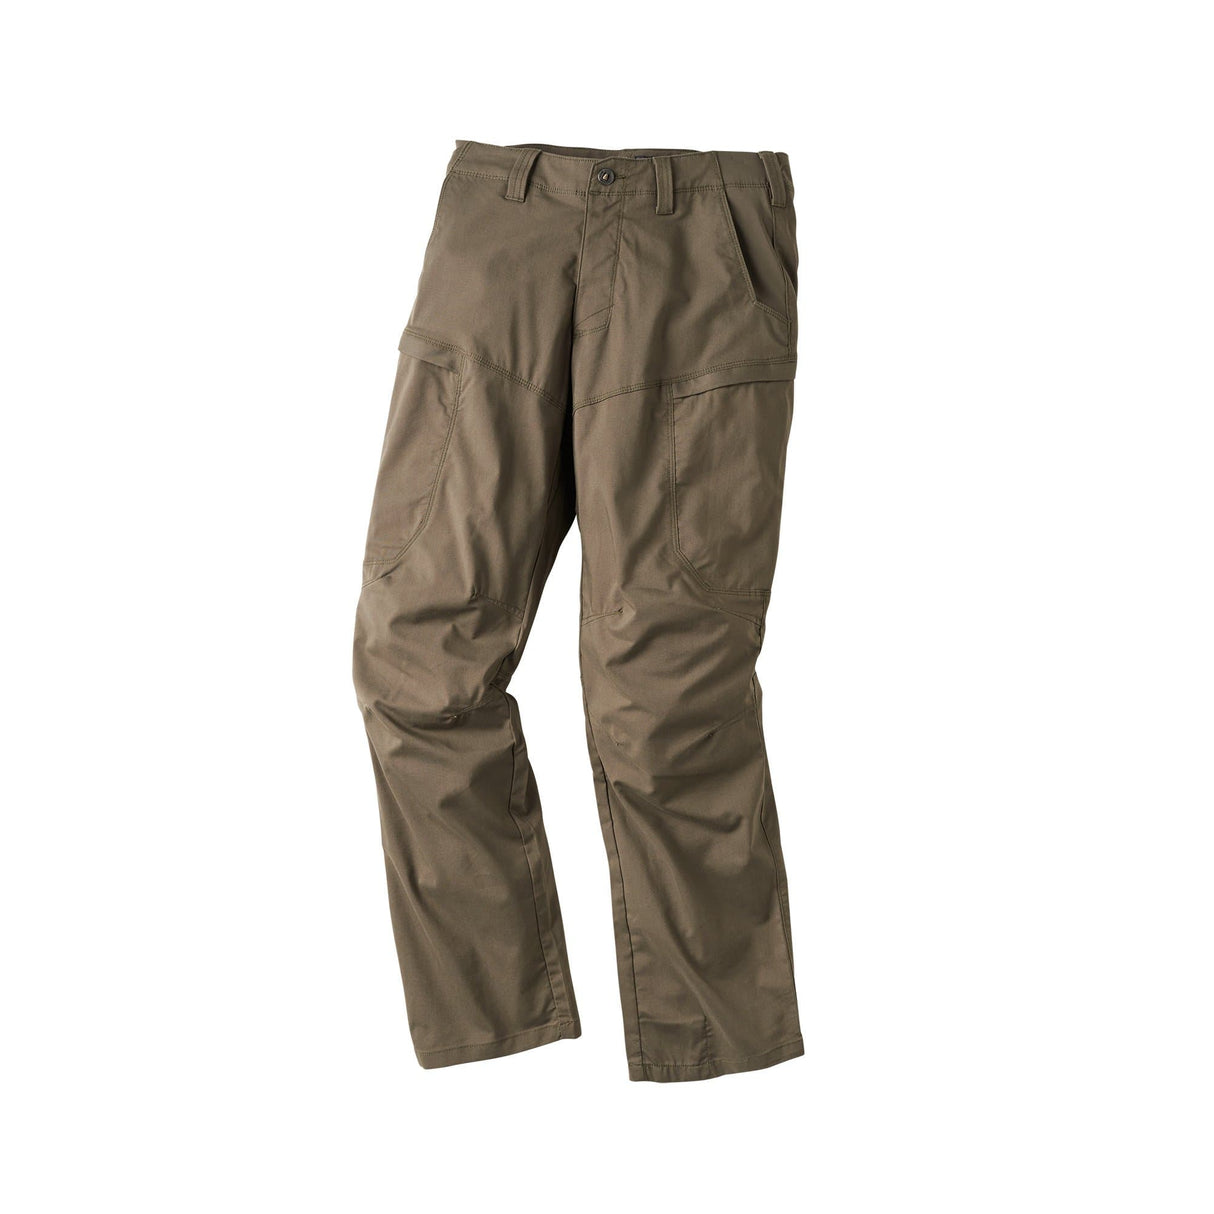 APEX PANT TUNDRA - 5.11 Tactical Finland Store